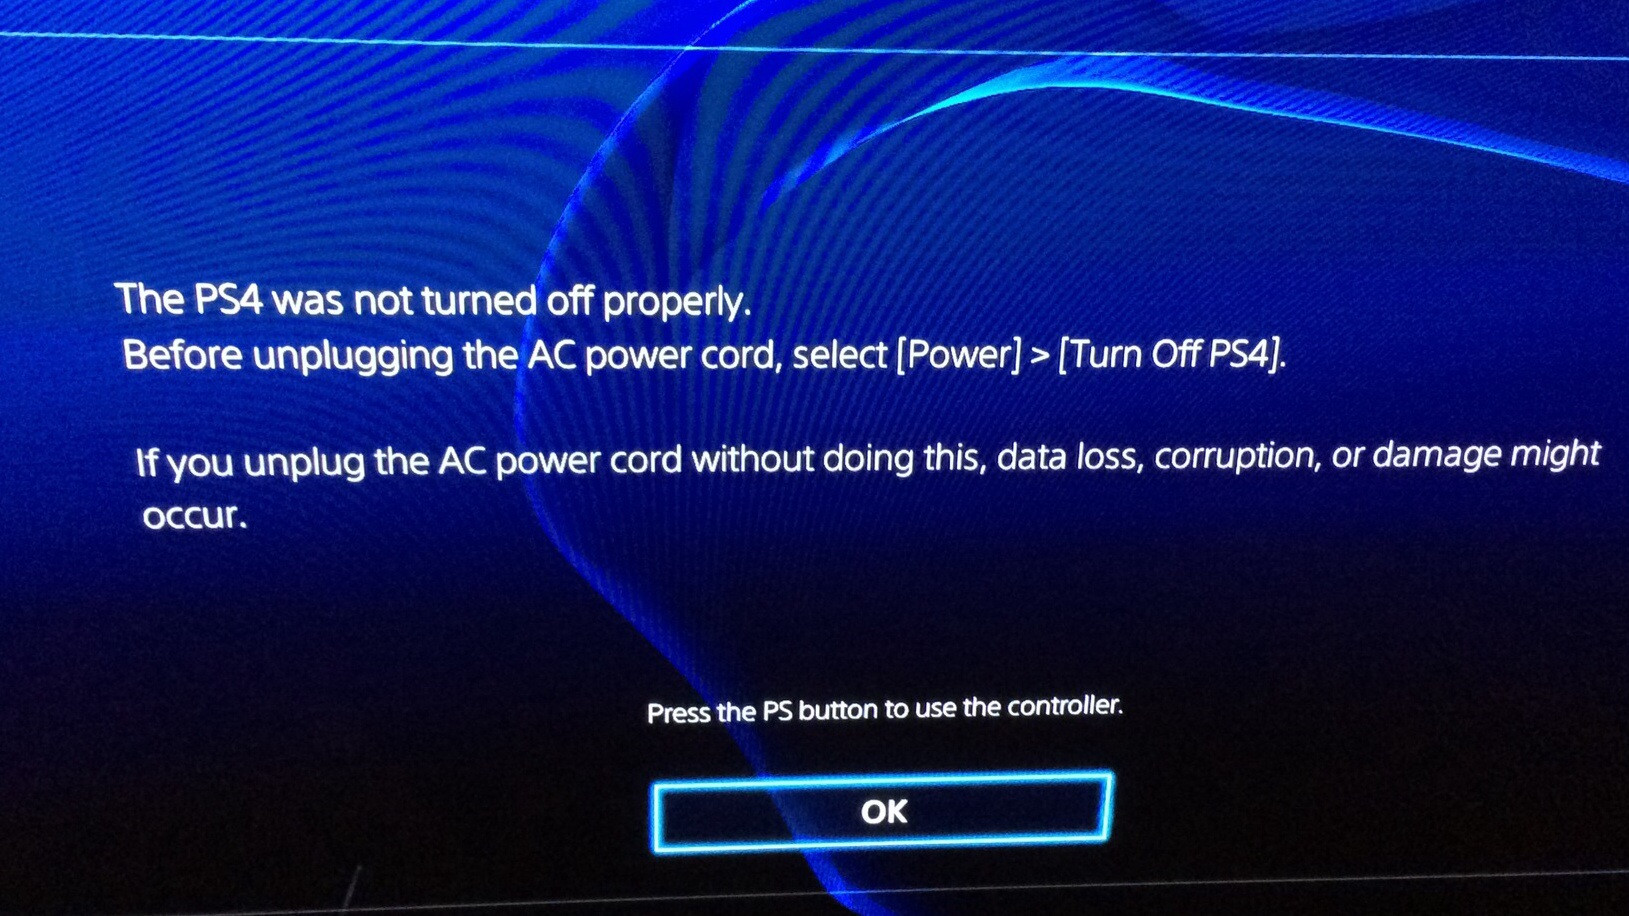 Turn off the console and unplug it.
Wait for a few minutes before plugging it back in and turning it on.